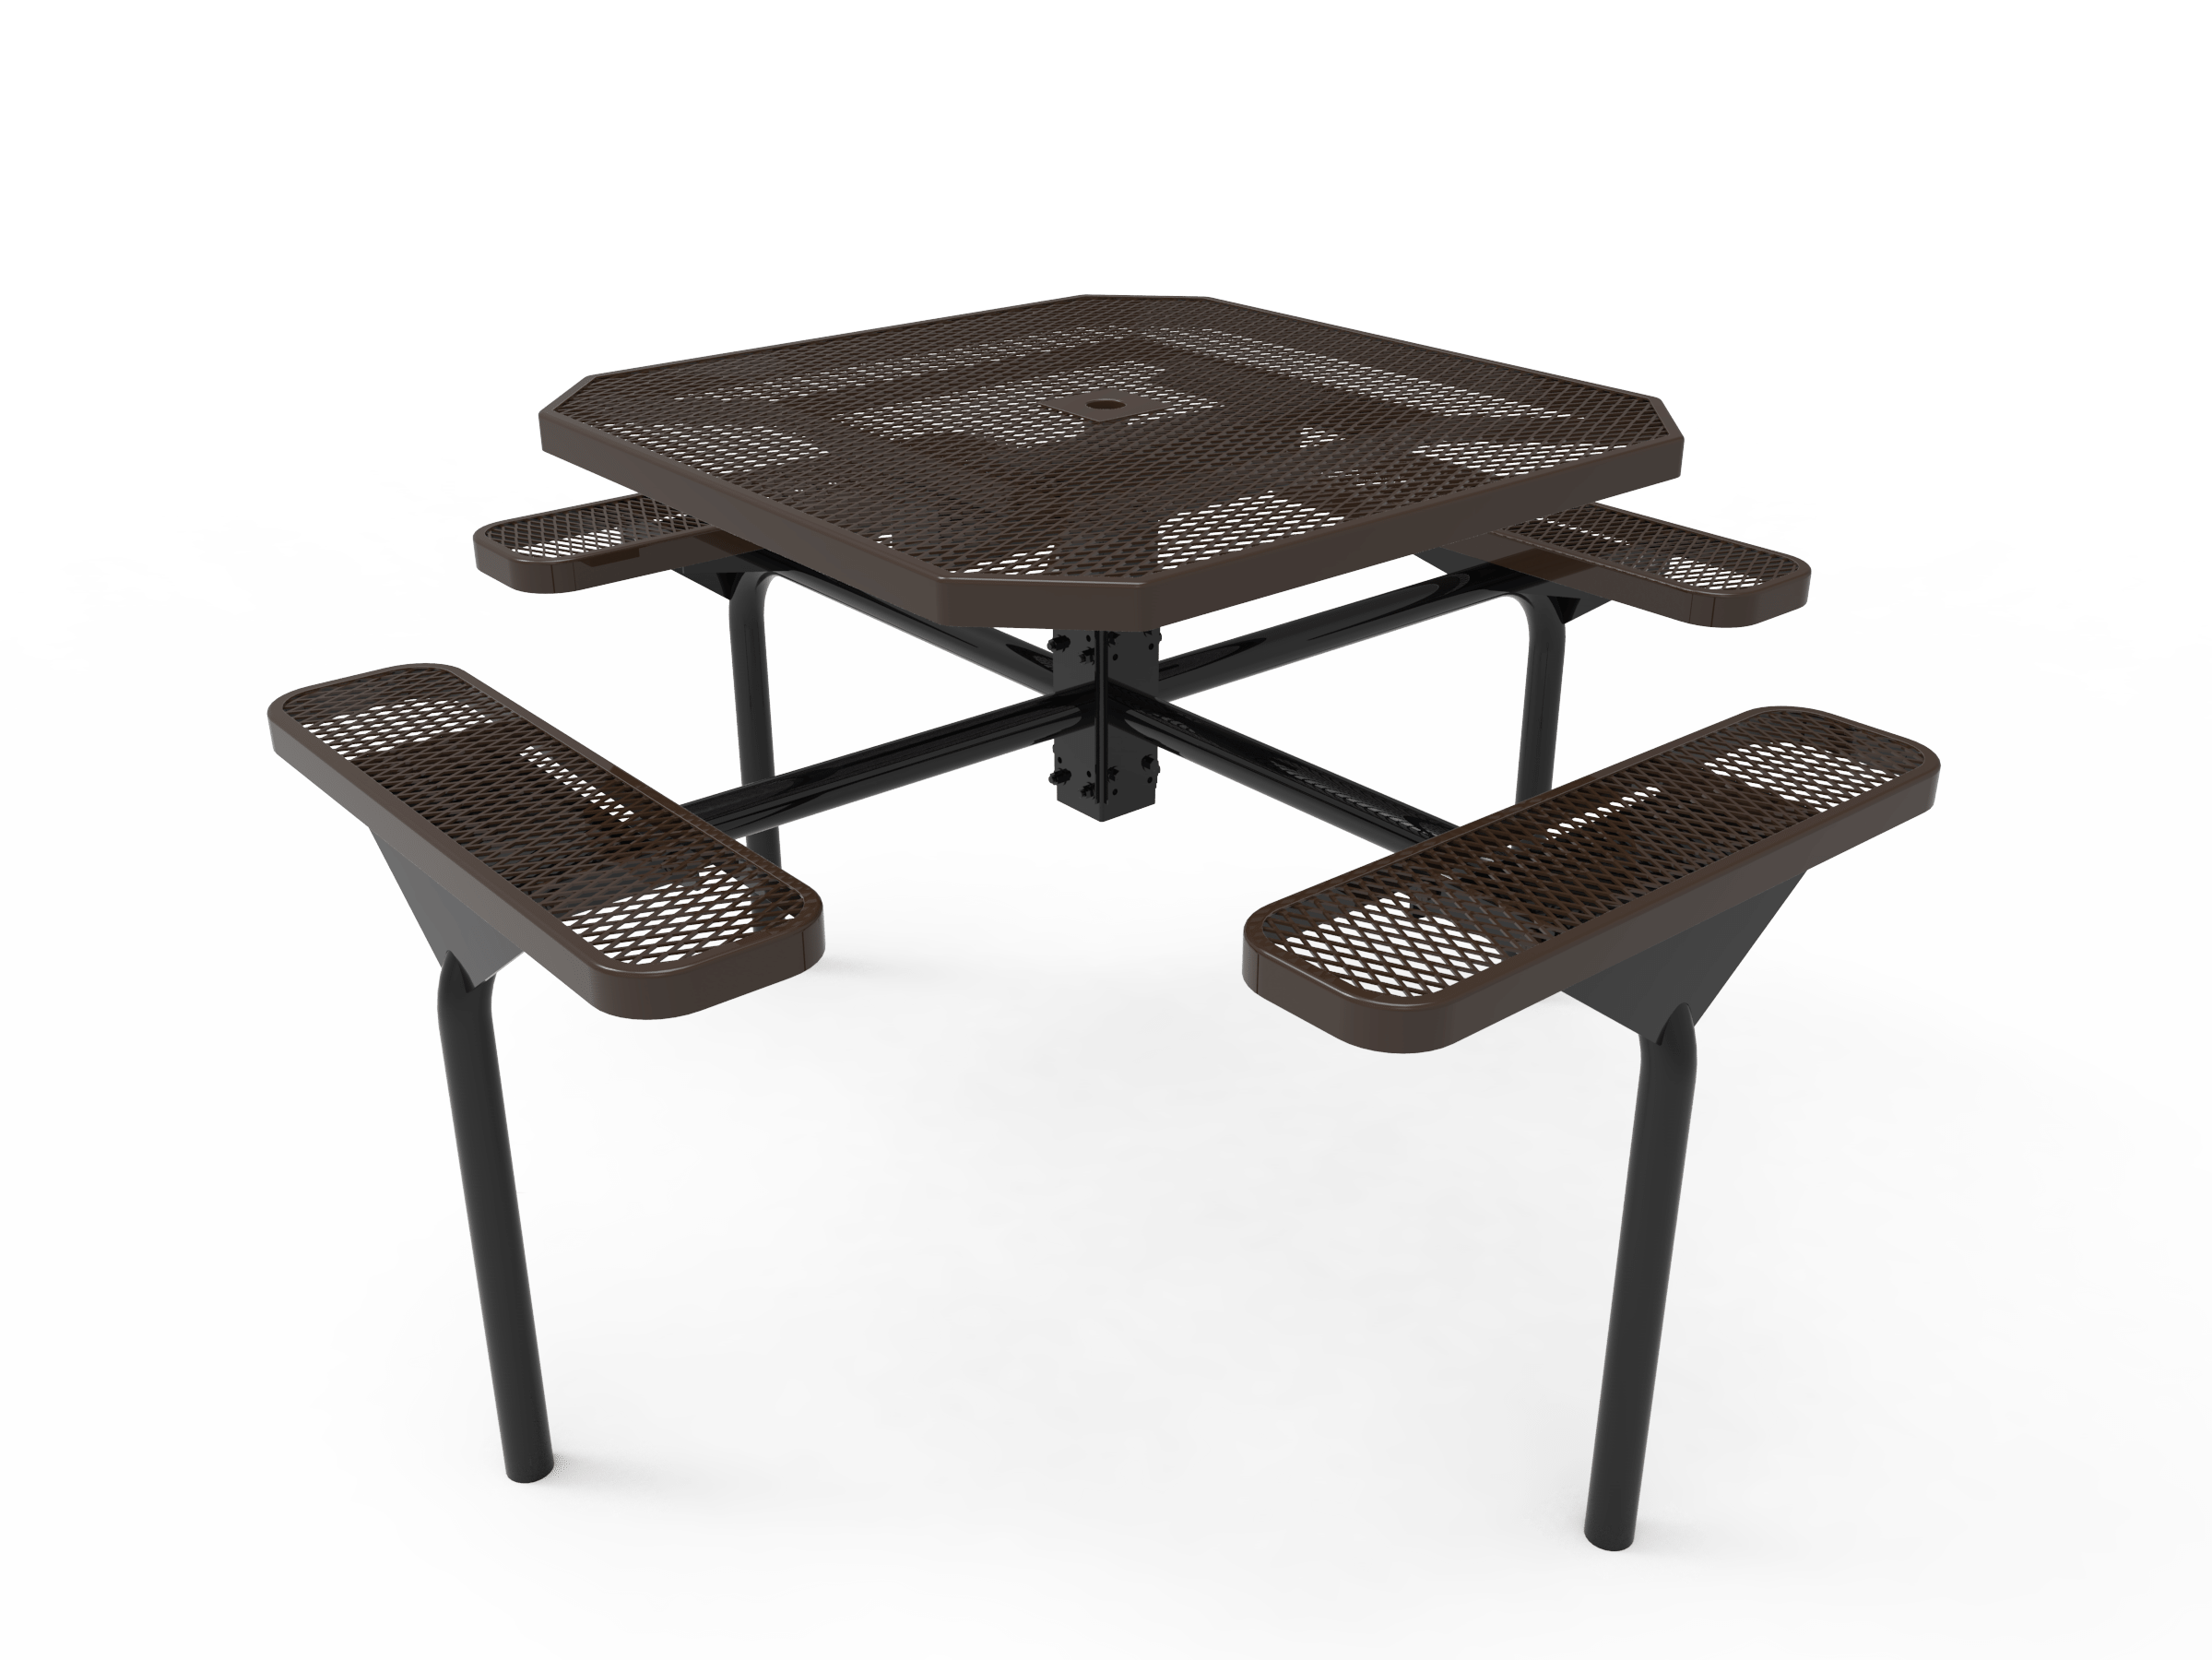 46″ Octagon Nexus In Ground Table With 4 Seats-Mesh
TOT46-C-47-000
Industry Standard Finish
$1189.00
TOT46-A-47-000
Advantage Premium Finish
$1479.00
